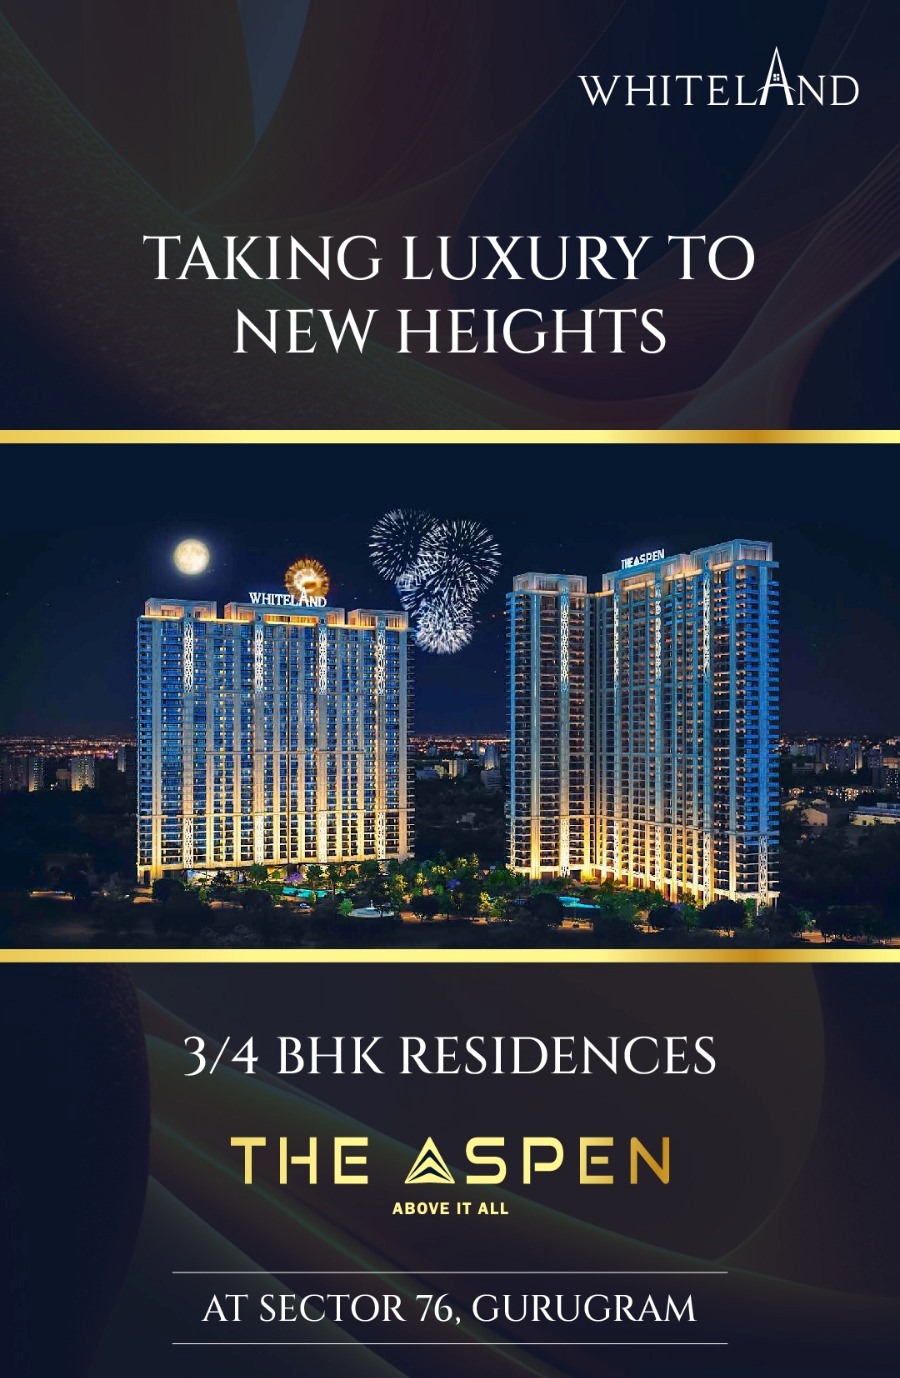 Taking luxury to new hights at Whiteland The Aspen in Sector 76, Gurgaon